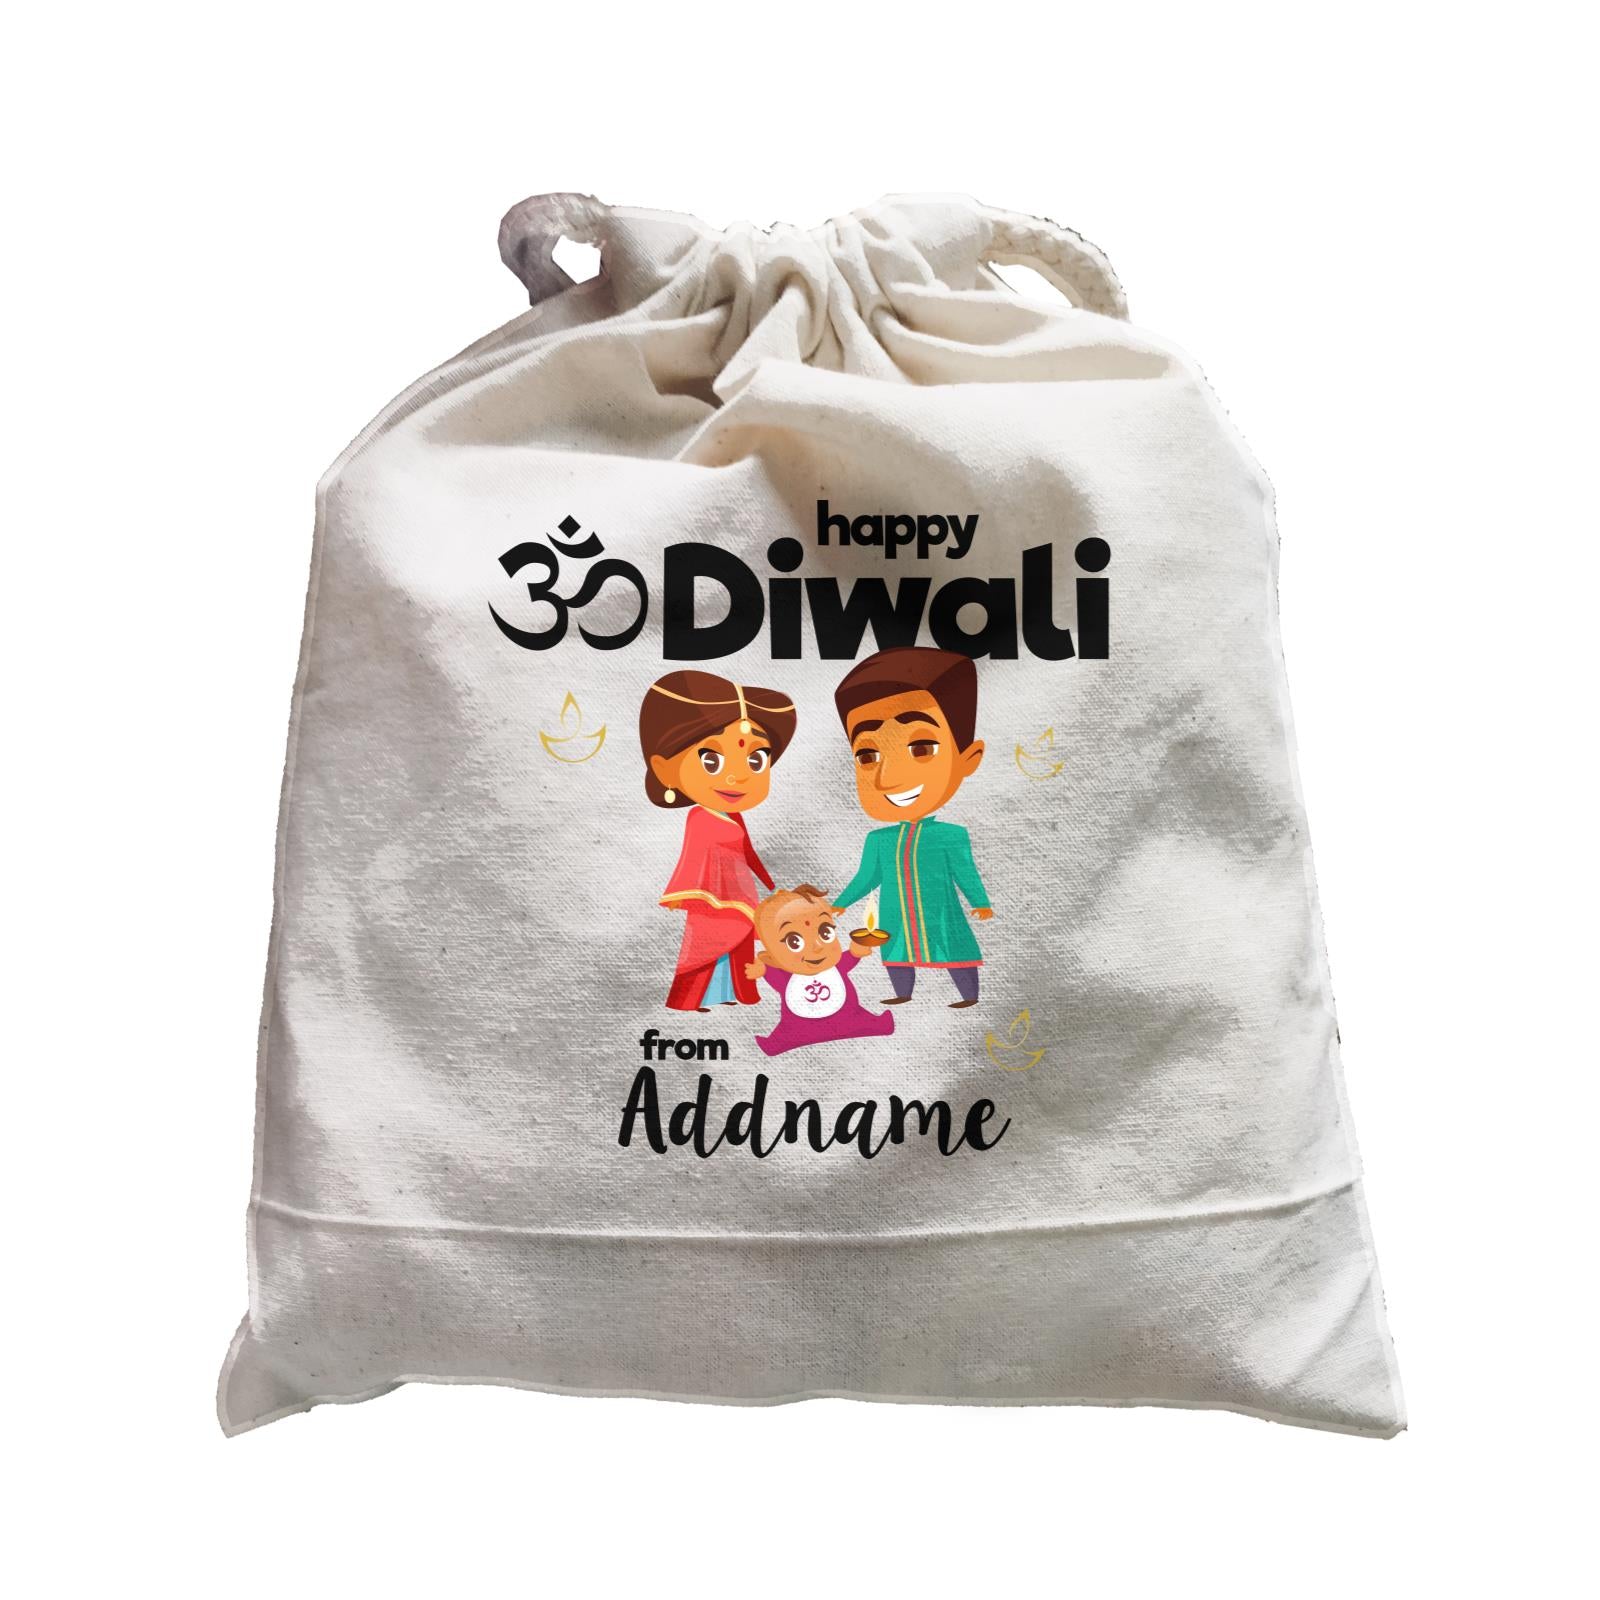 Cute Family Of Three OM Happy Diwali From Addname Satchel